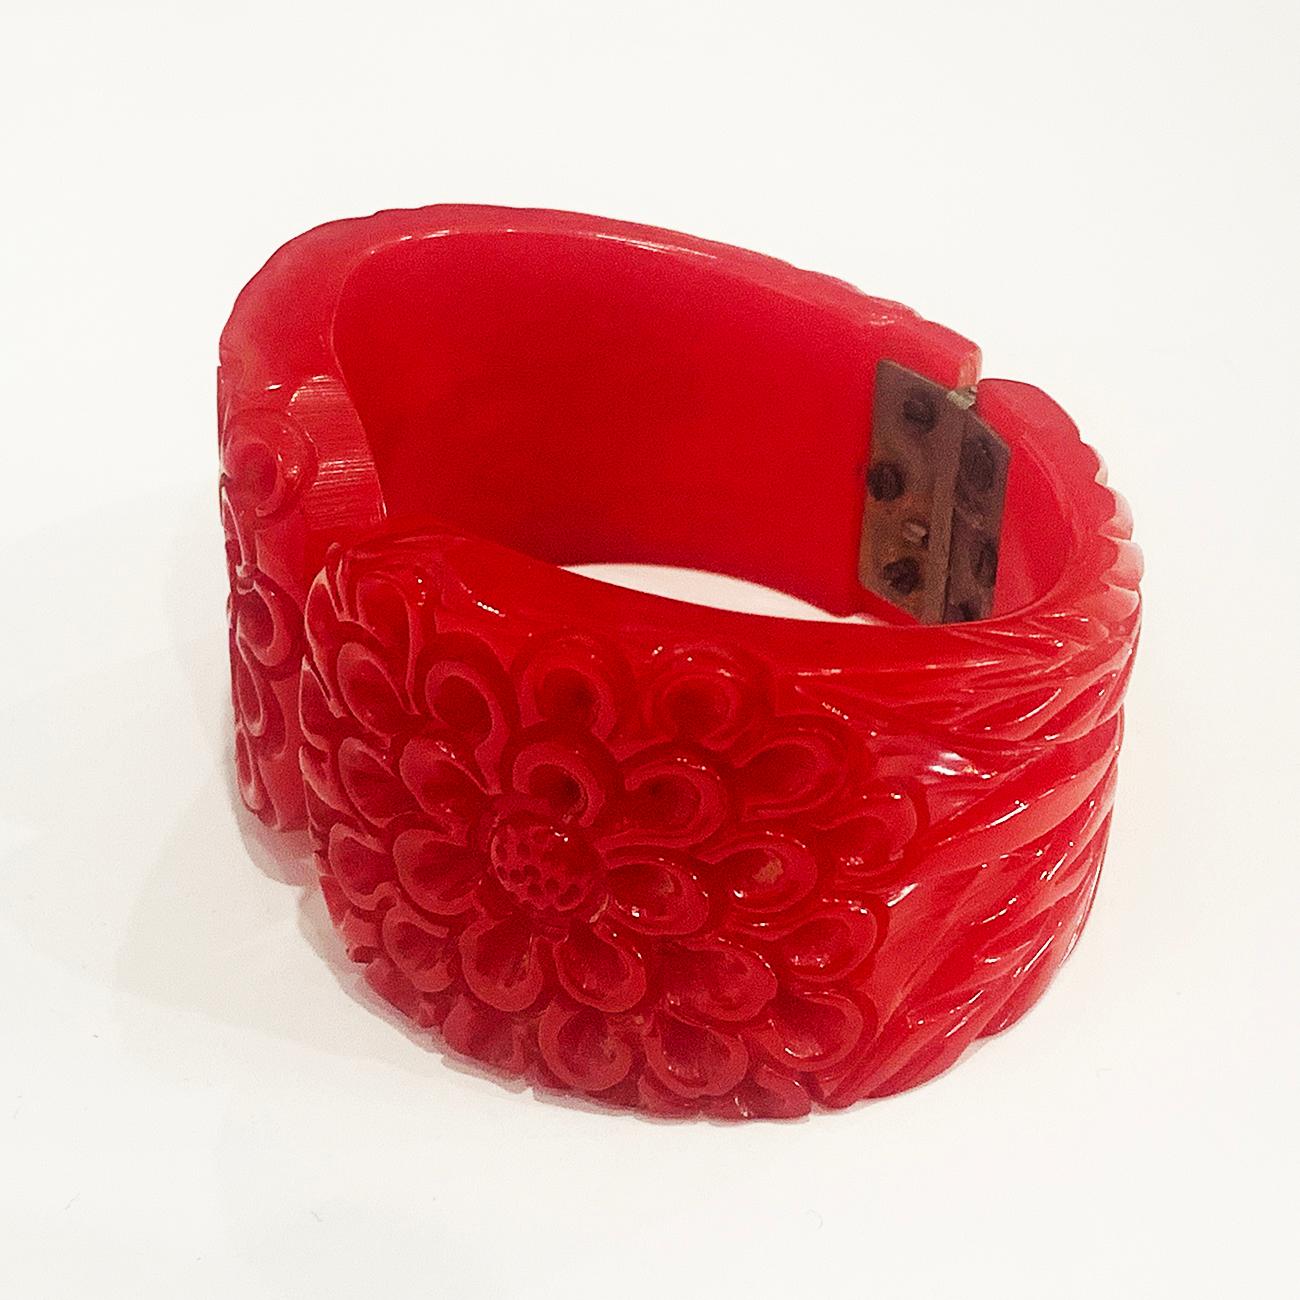 Art Deco Clamper Bangle heavily and intricately carved in form of a Chrysanthemum flower, Brilliant Lipstick Red. Original nickel plate spring hinge in perfect working condition, with no damage or repairs at all to the bangle. One of the best you